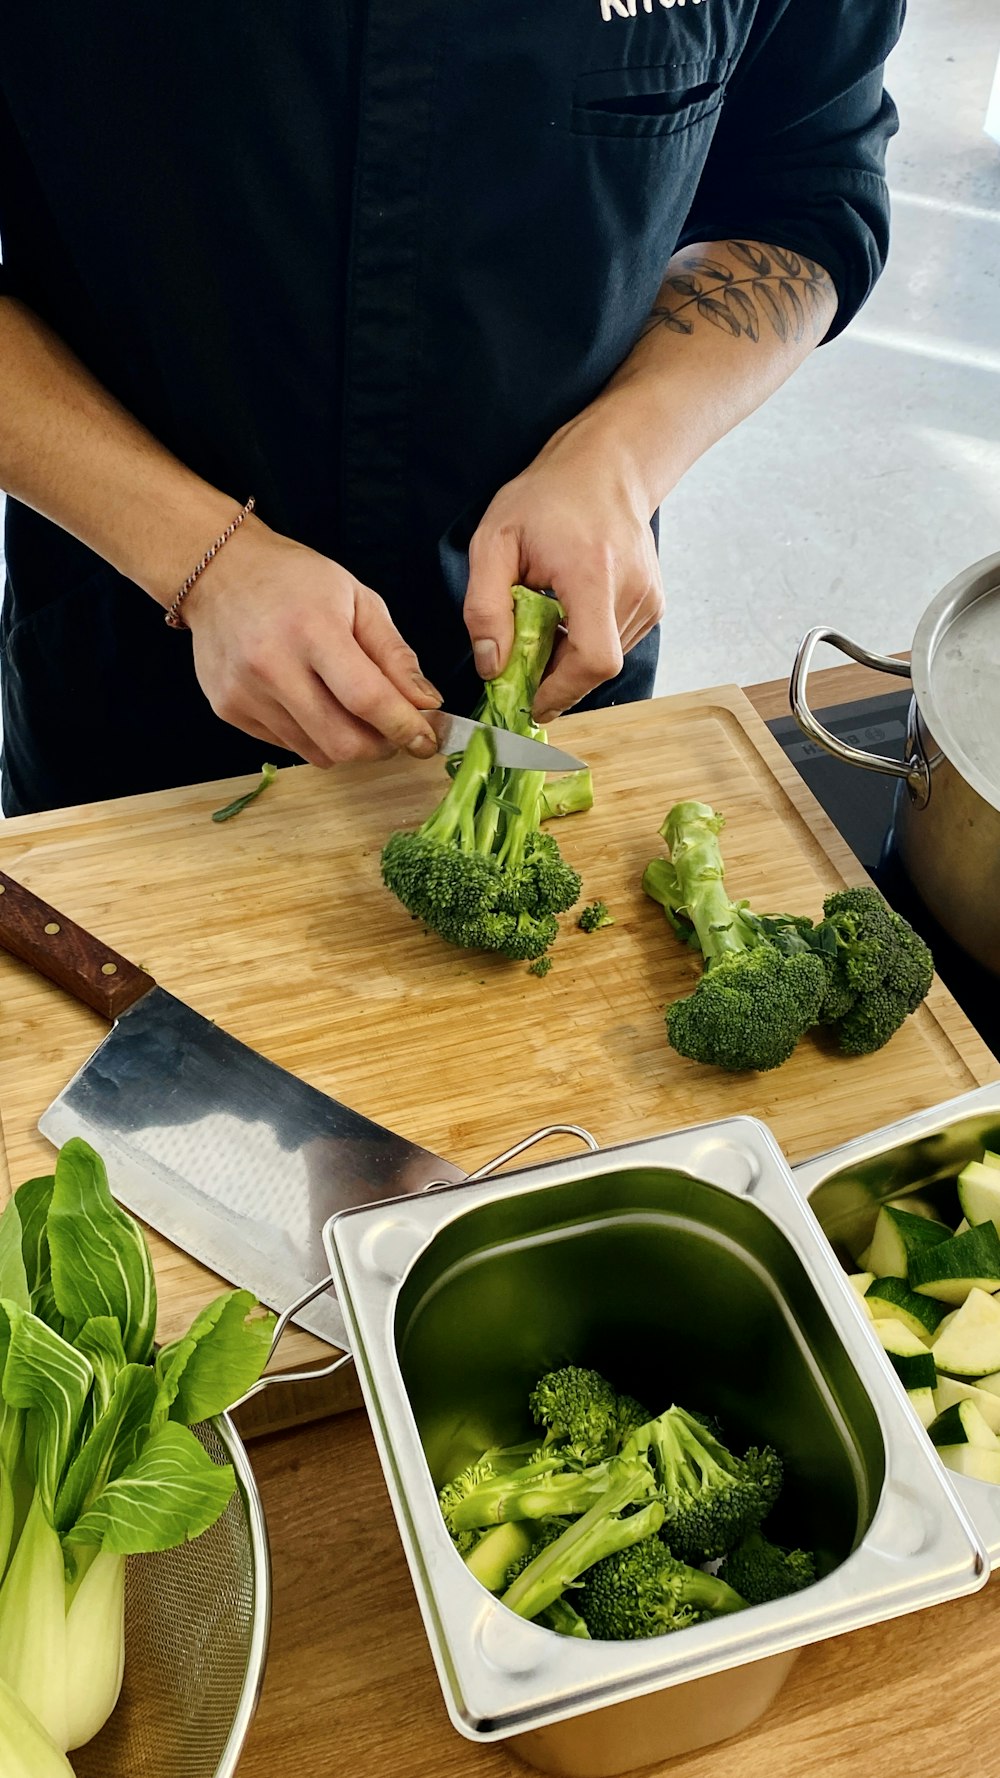 A person cutting broccoli on a cutting board photo – Free Weapon Image on  Unsplash